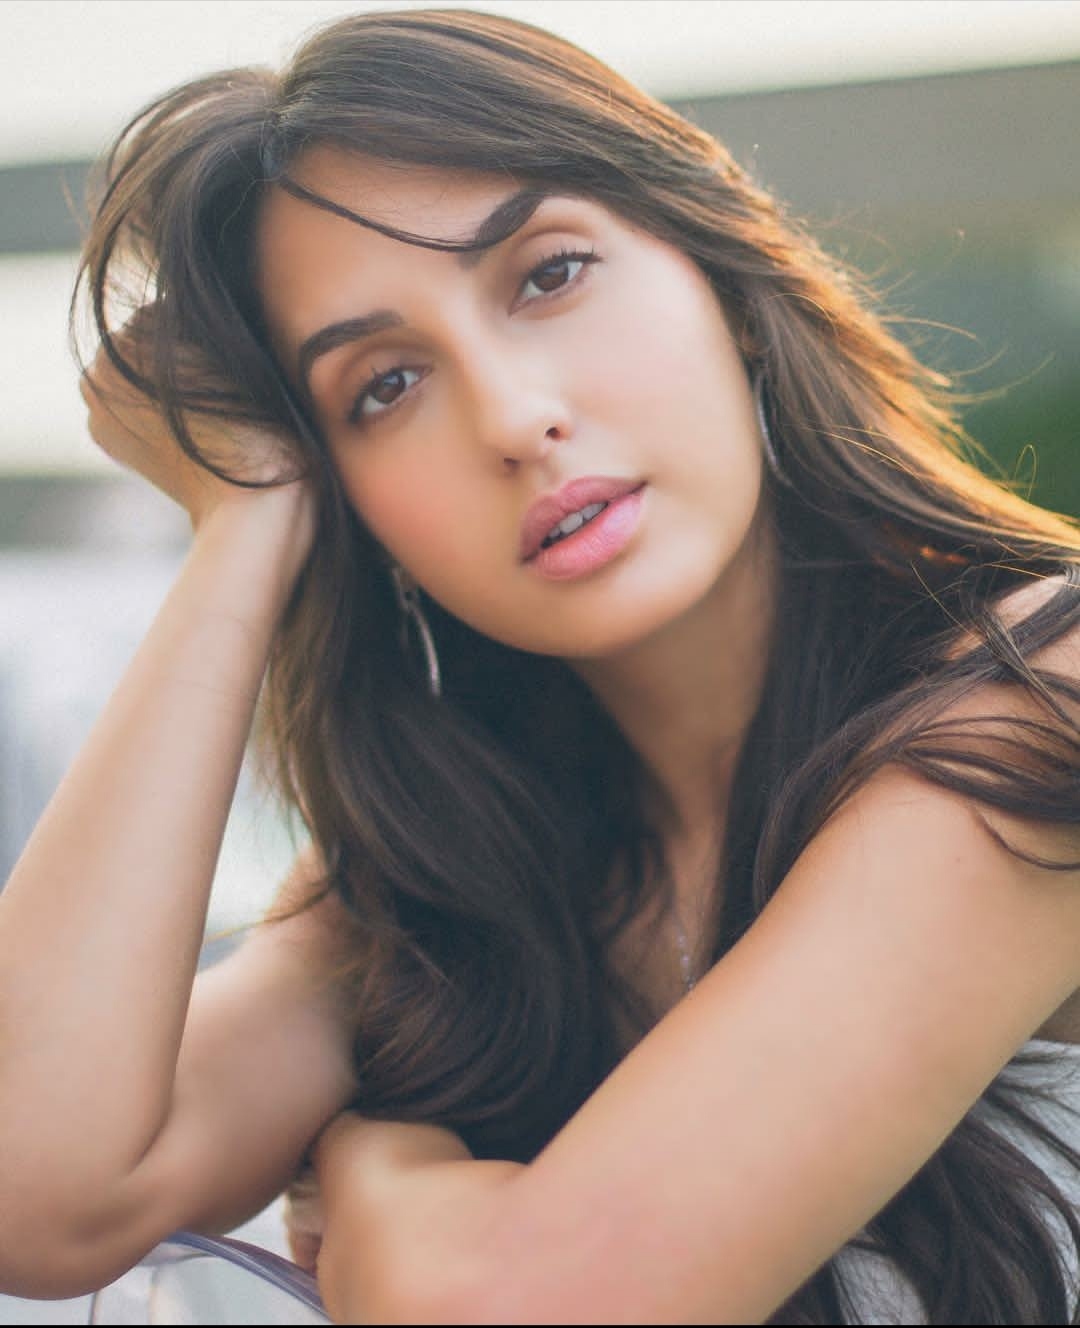 80+ Hot Sizzling HD Images Of Nora Fatehi - Insta Stars - 02